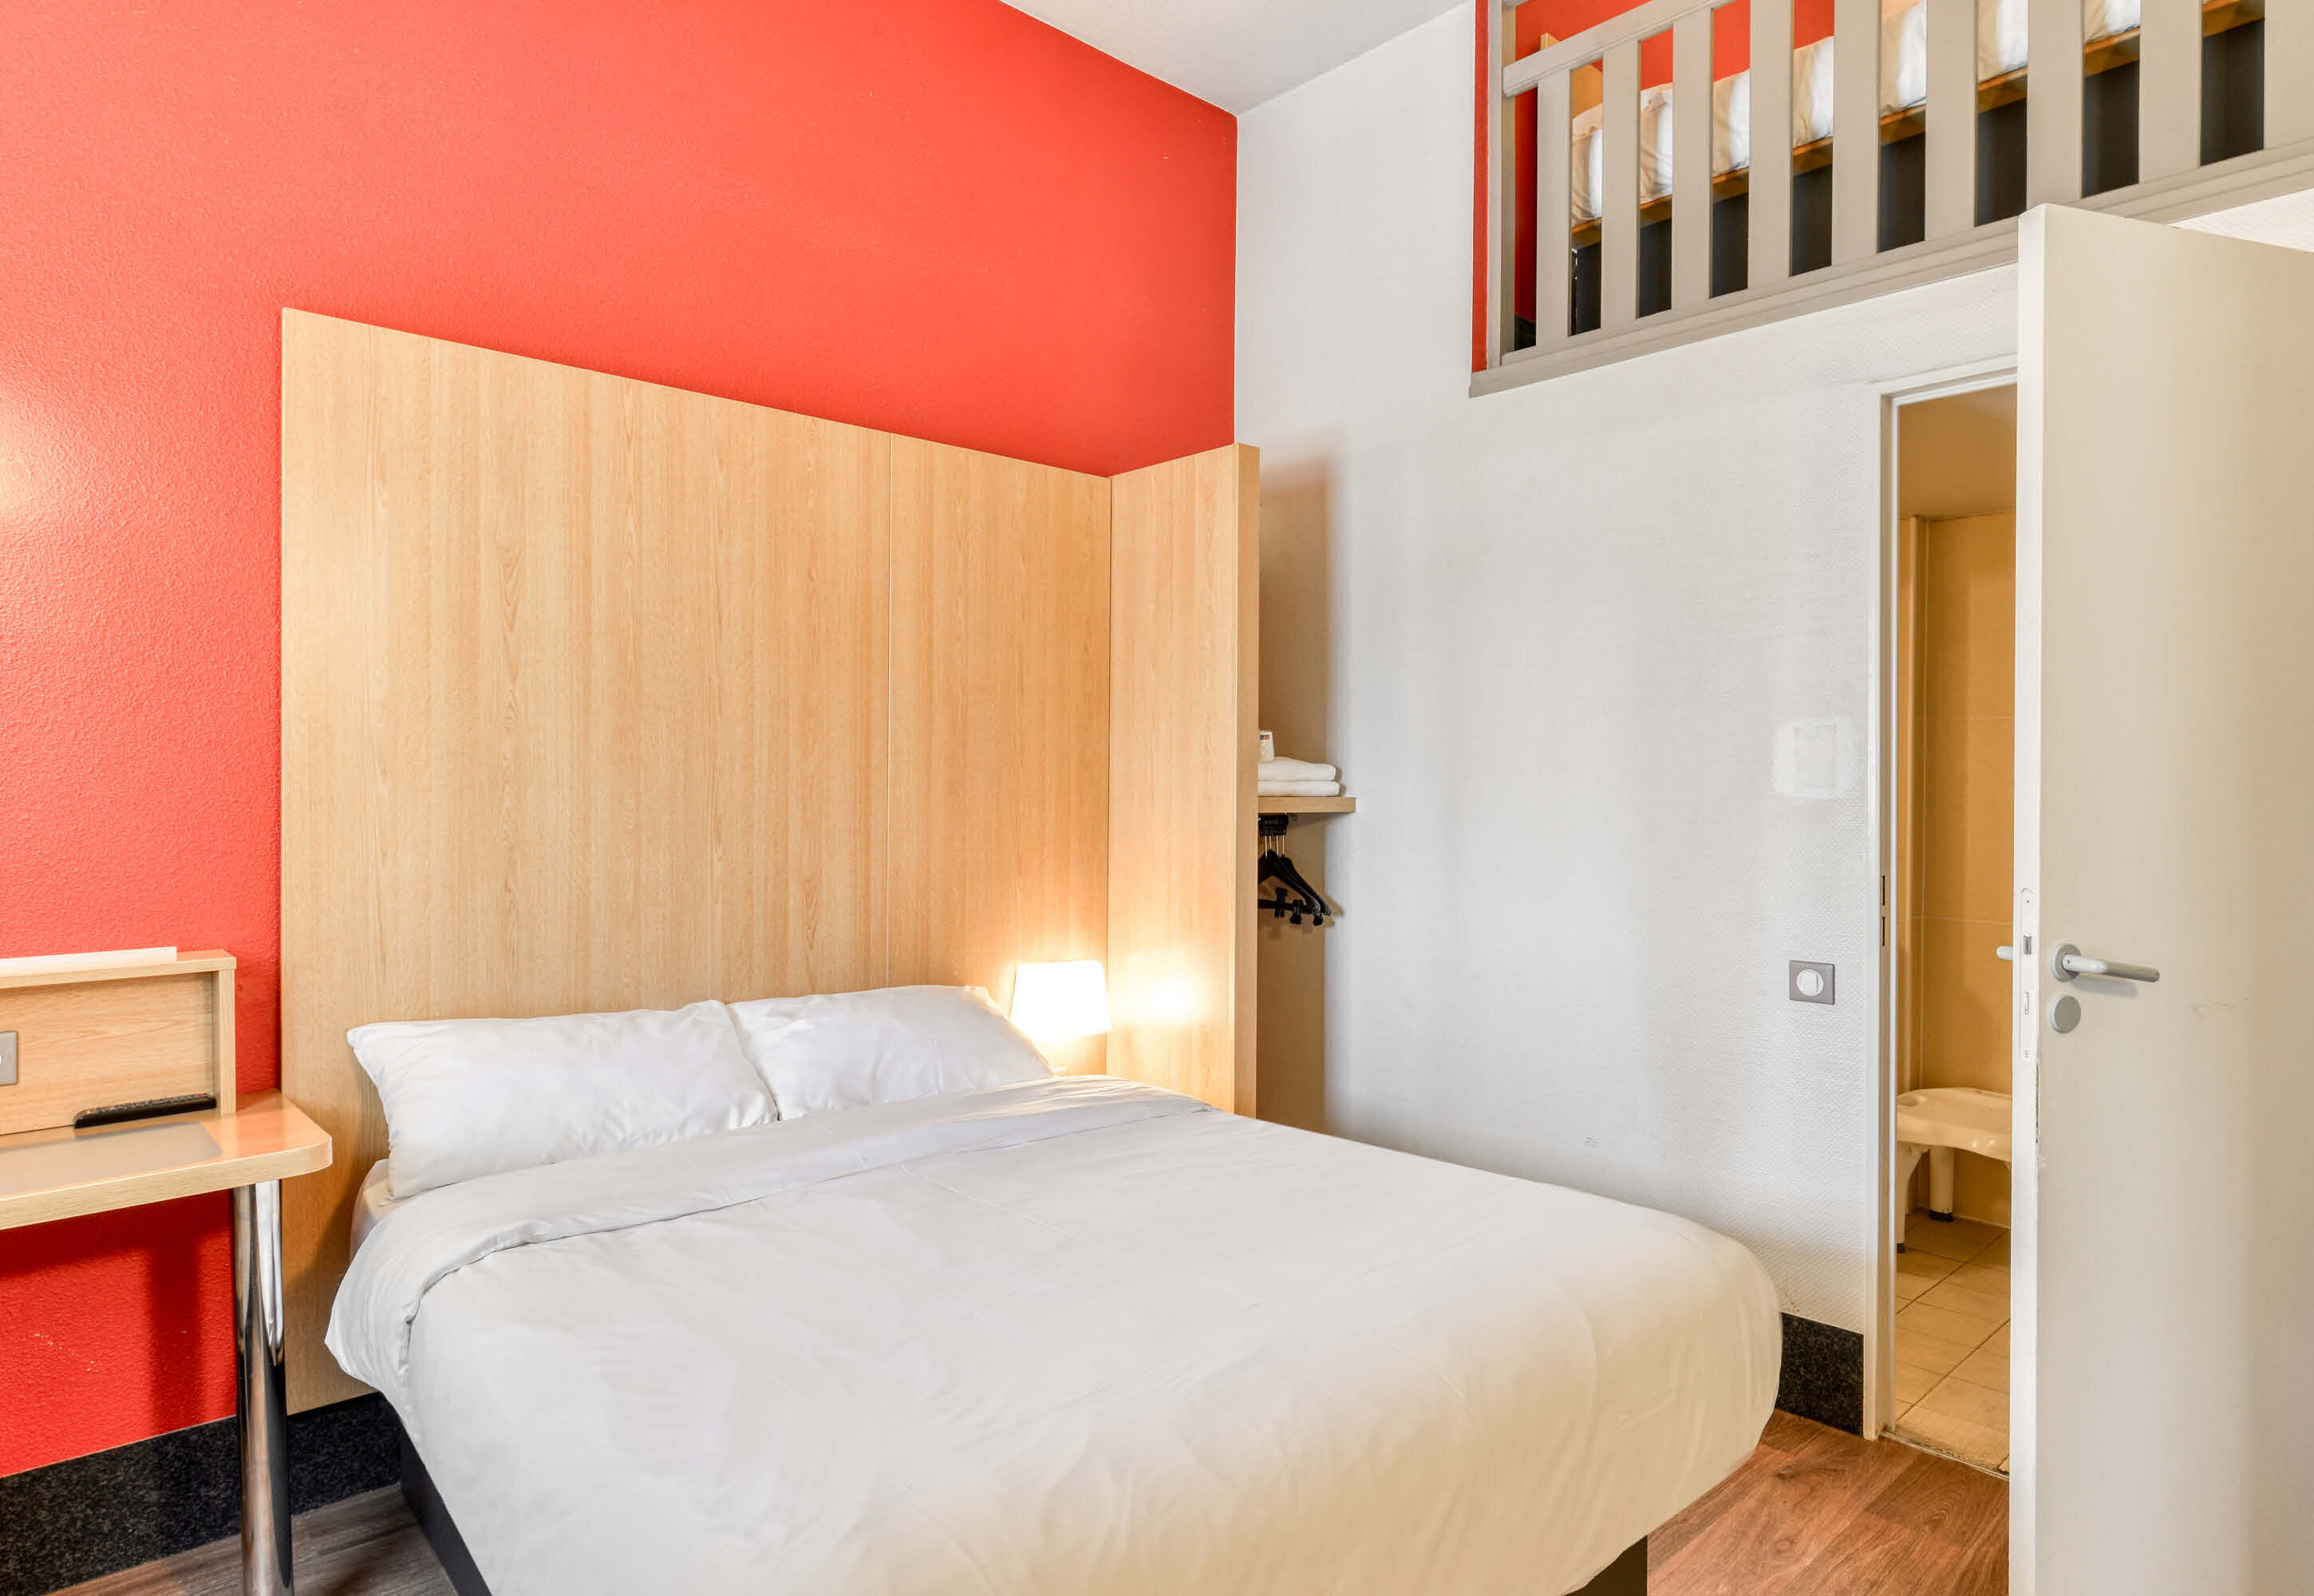 Images B&B HOTEL Montpellier 2